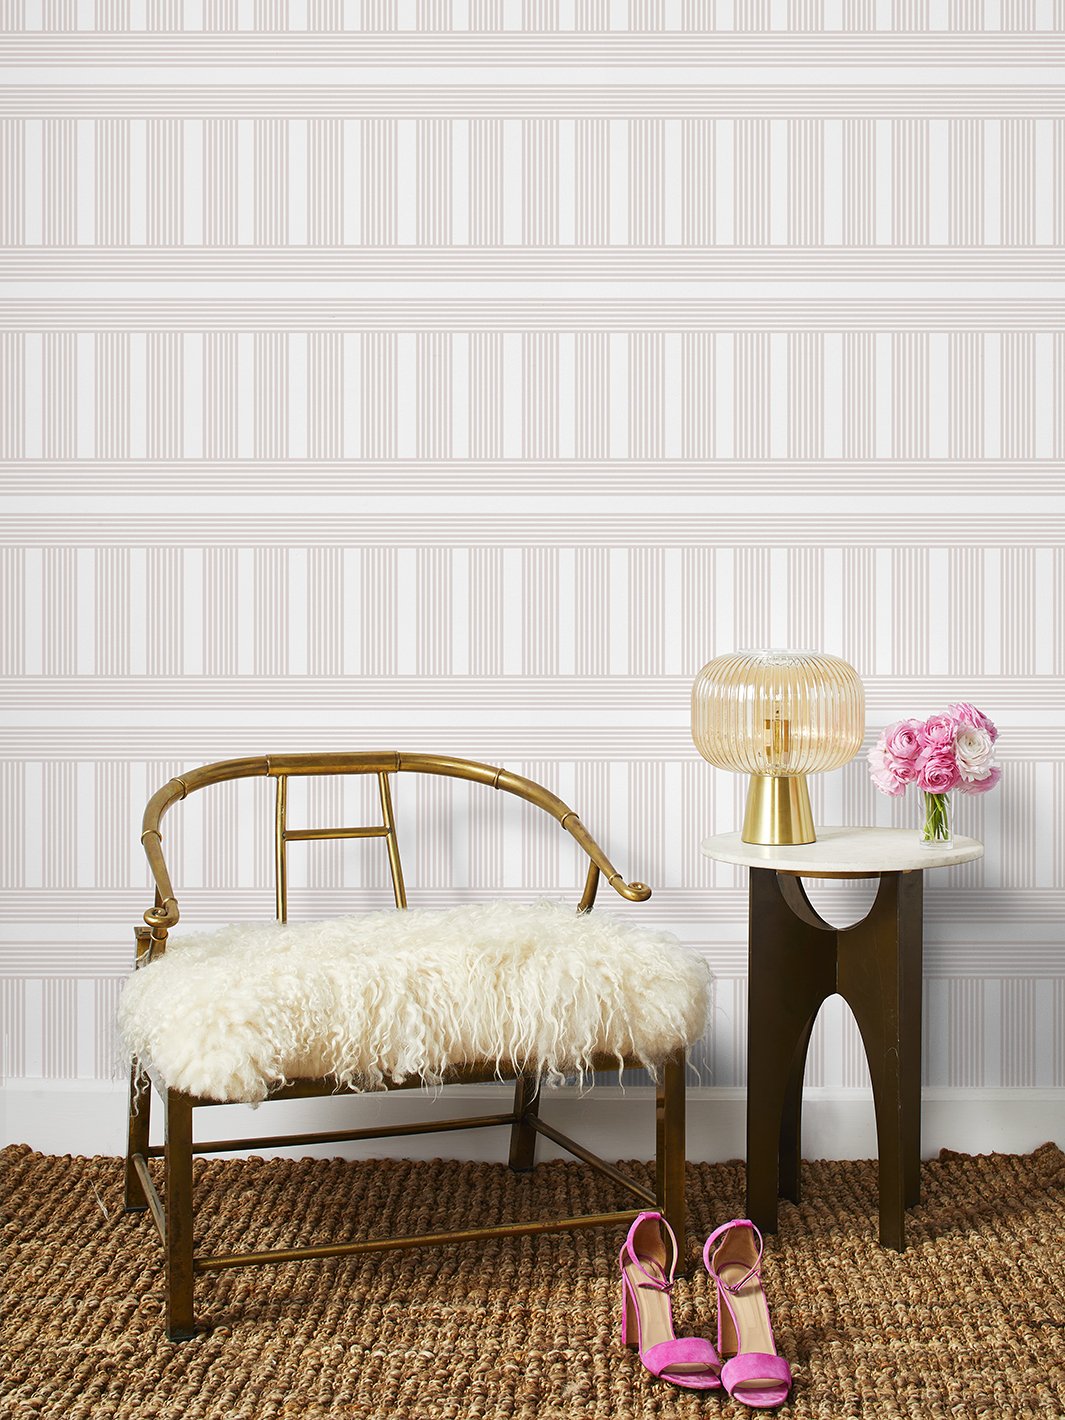 'Roman Holiday Grid' Wallpaper by Barbie™ - Oyster